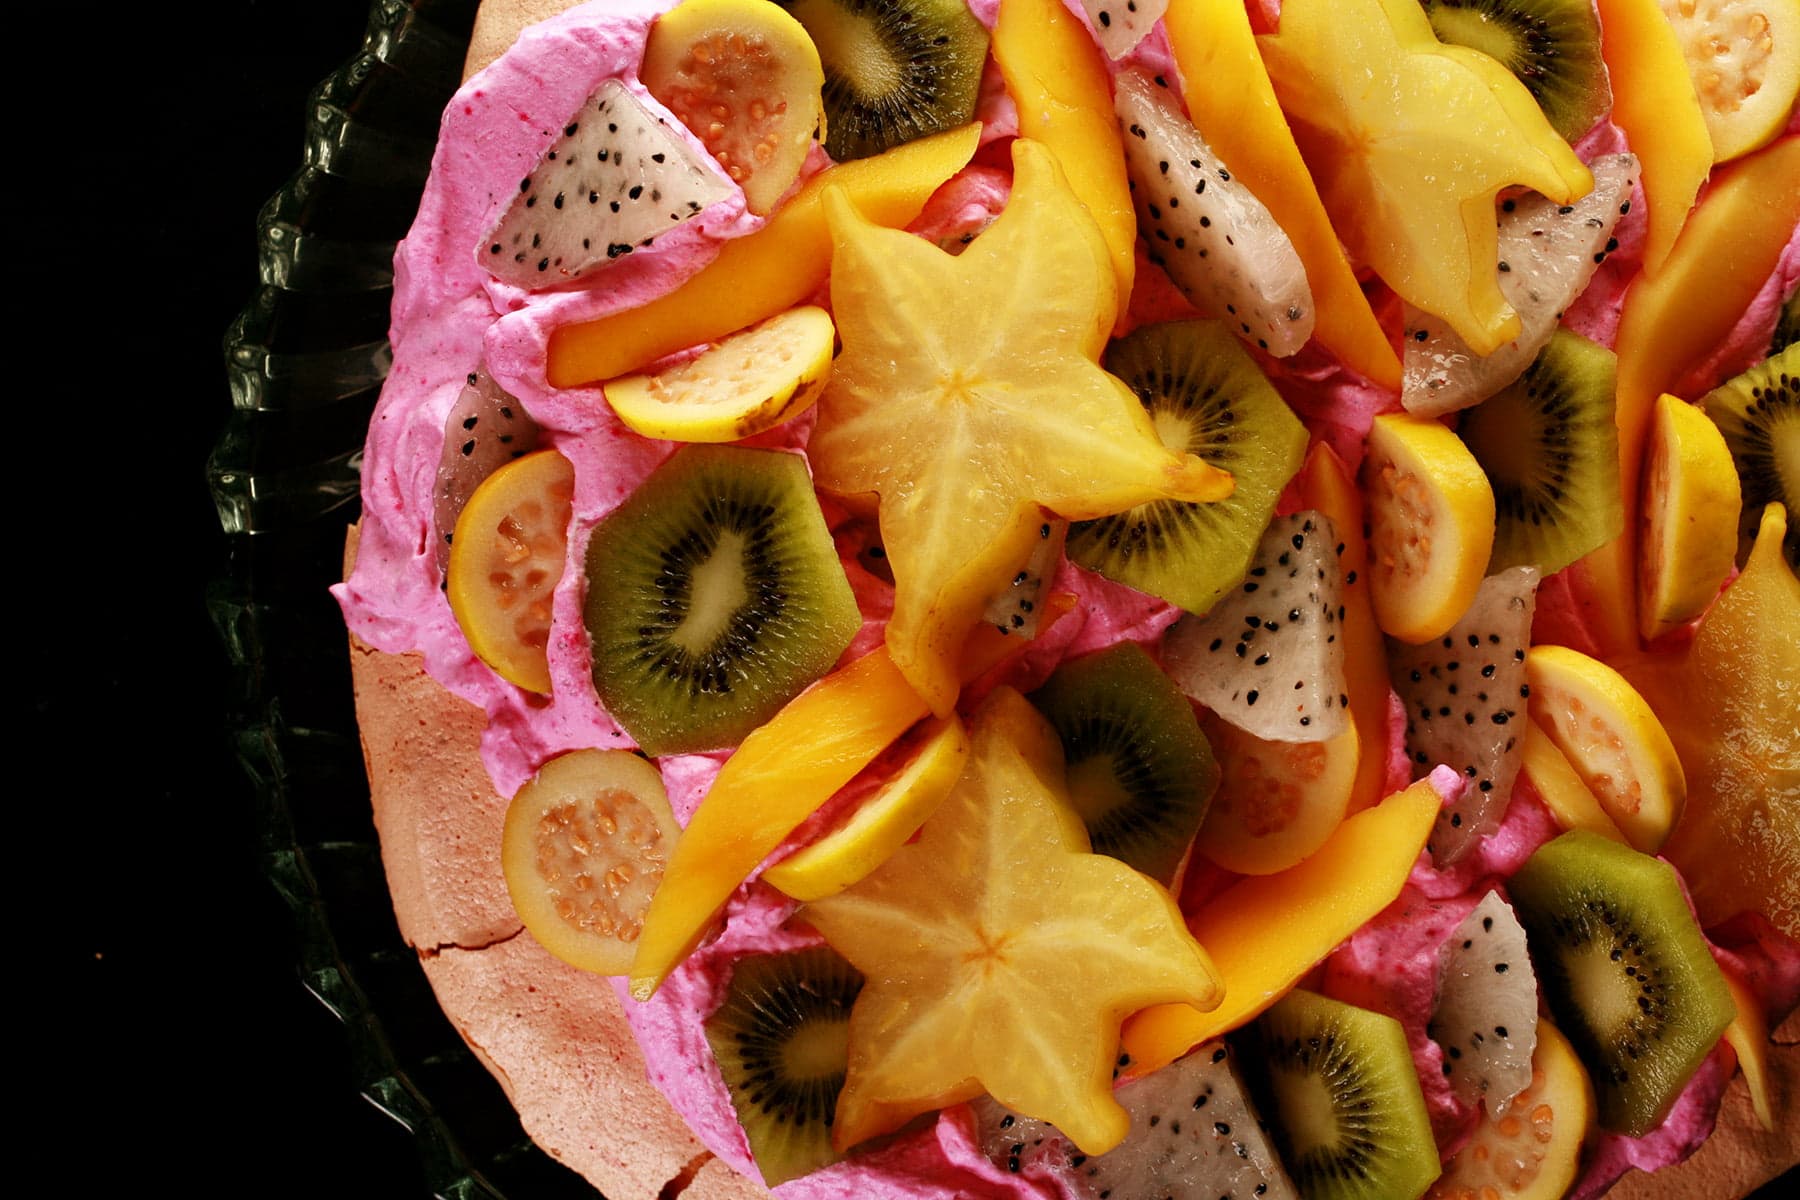 Close up view of a colourful pavlova. It has a light pink meringue base, bright pink whipped cream, and is topped with dragon fruit, star fruit, guava, and mango.